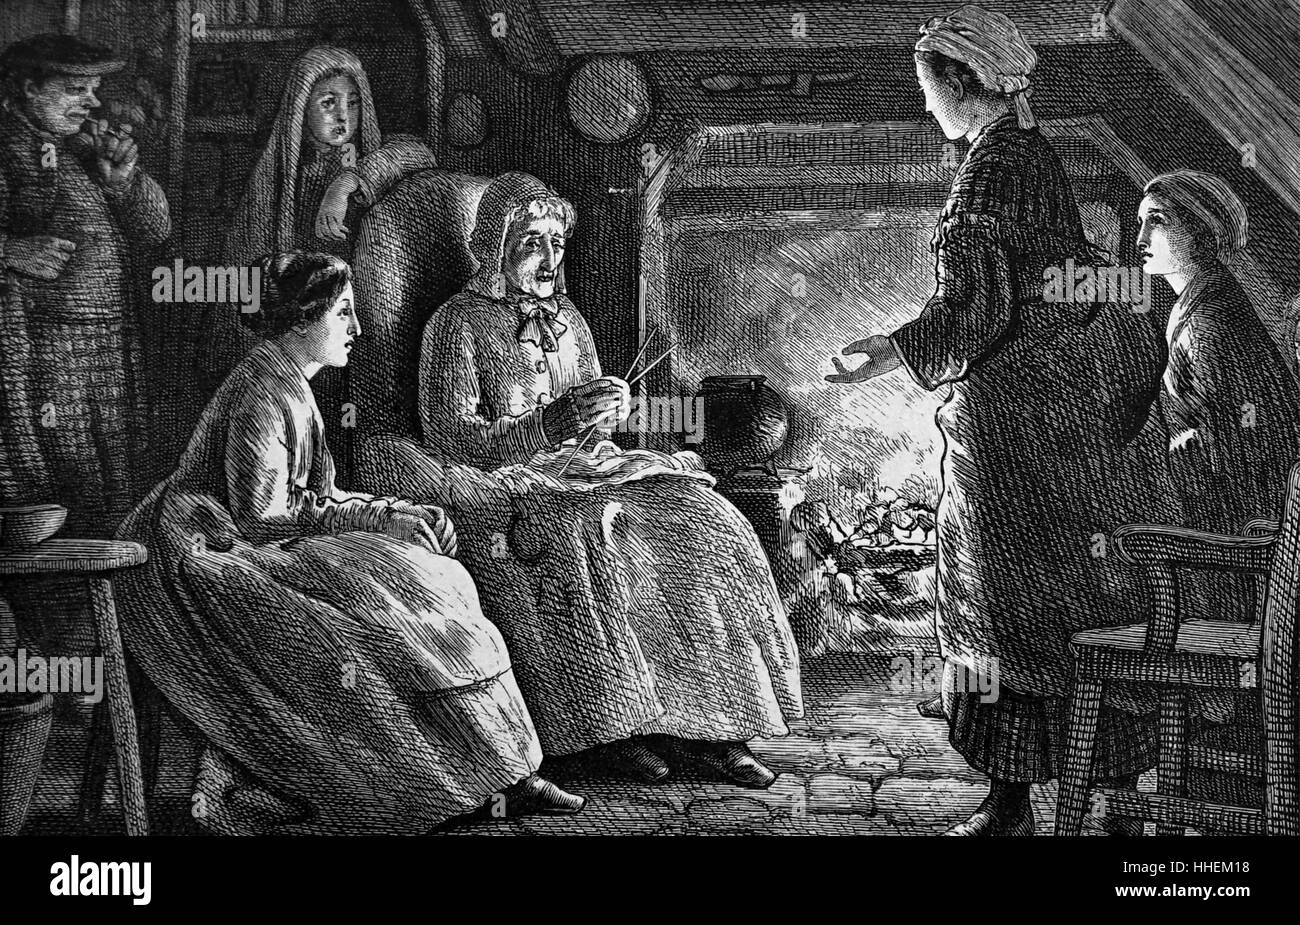 Illustration depicting a group of women sat gossiping around a raging fire. Illustrated by Francis Wilfred Lawson (1842-1935) a British artist. Dated 19th Century Stock Photo